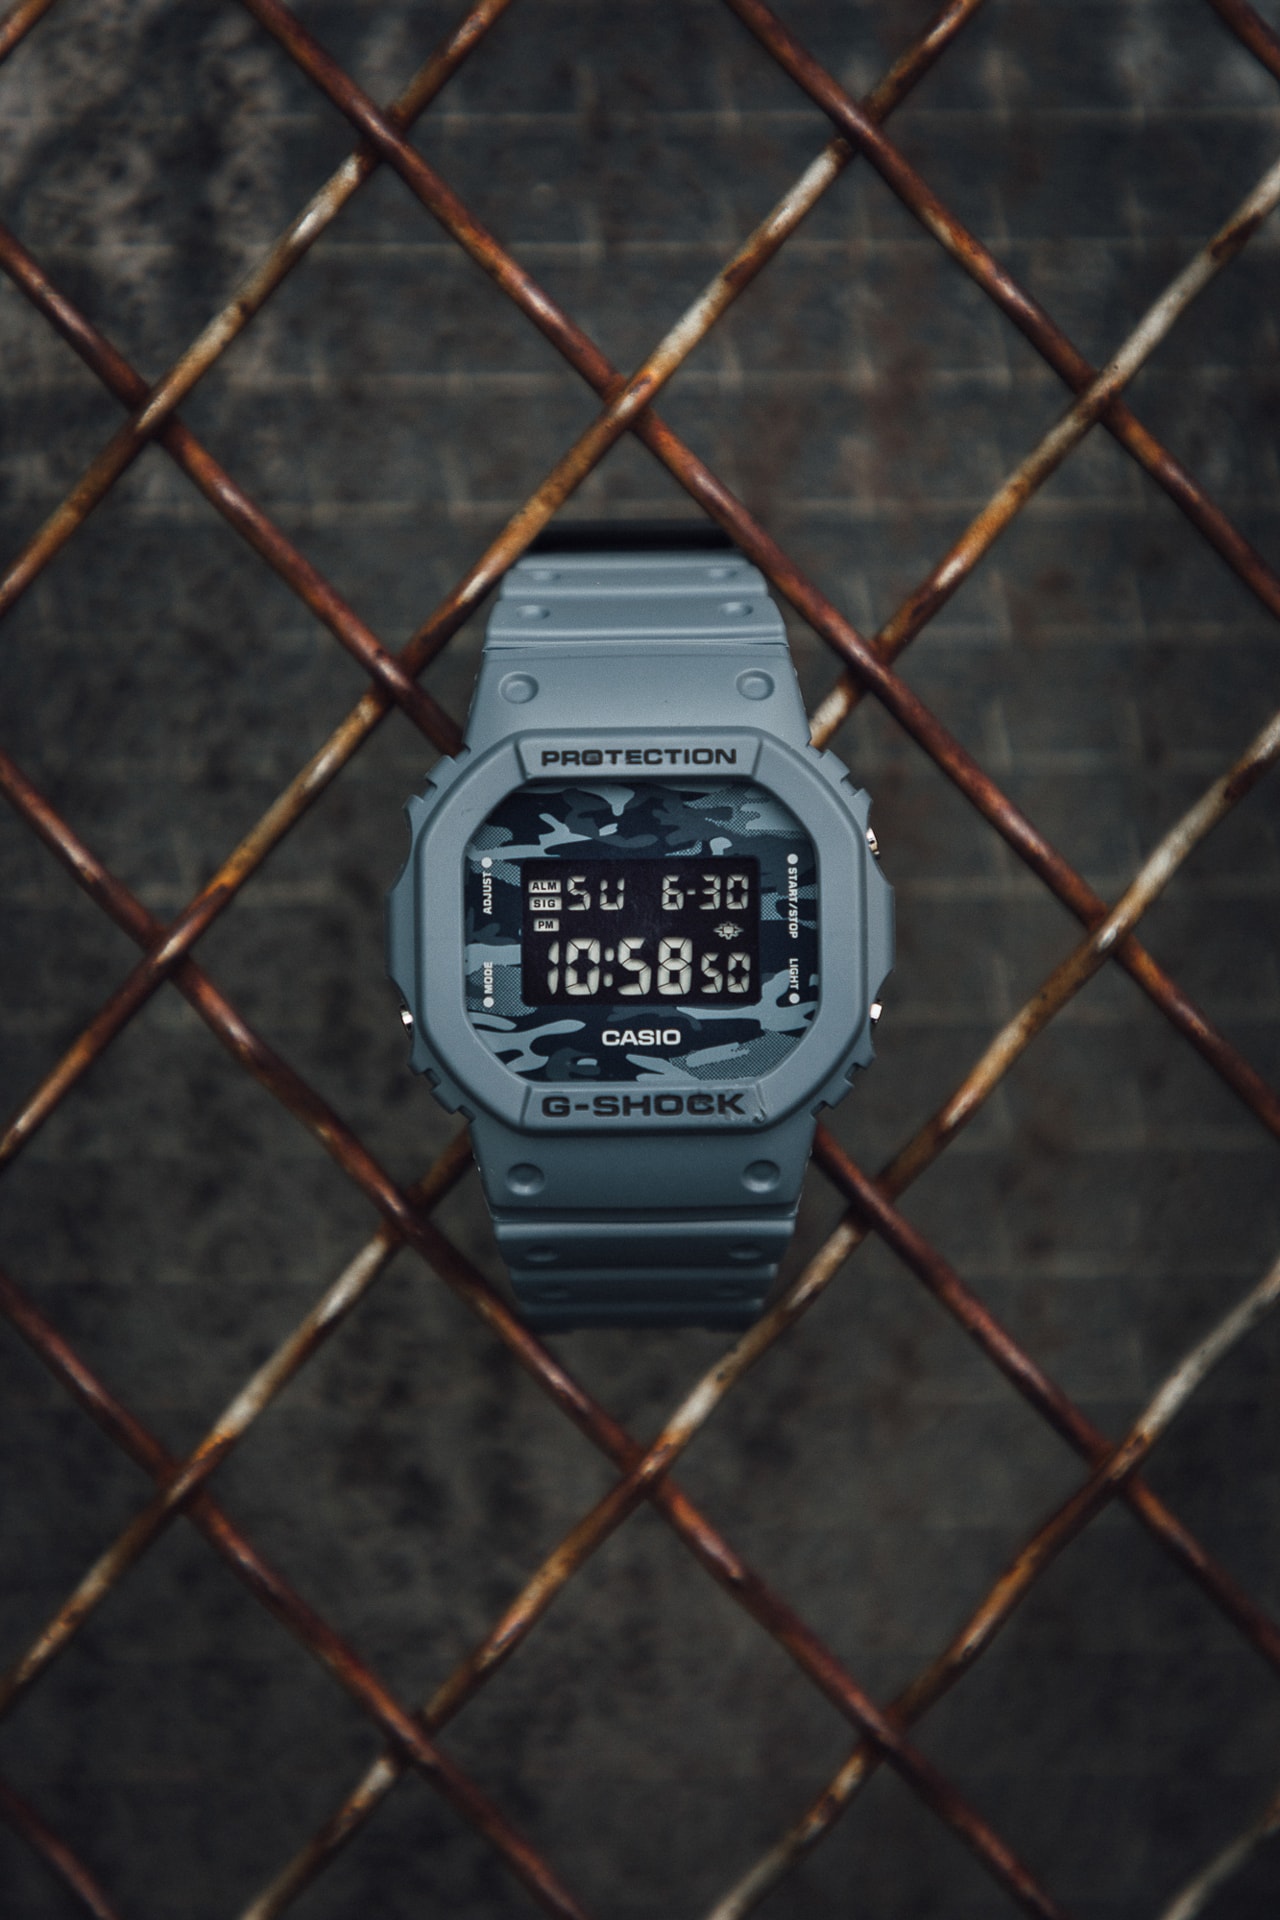 G-SHOCK 推出全新 Utility Dial Camouflage 系列